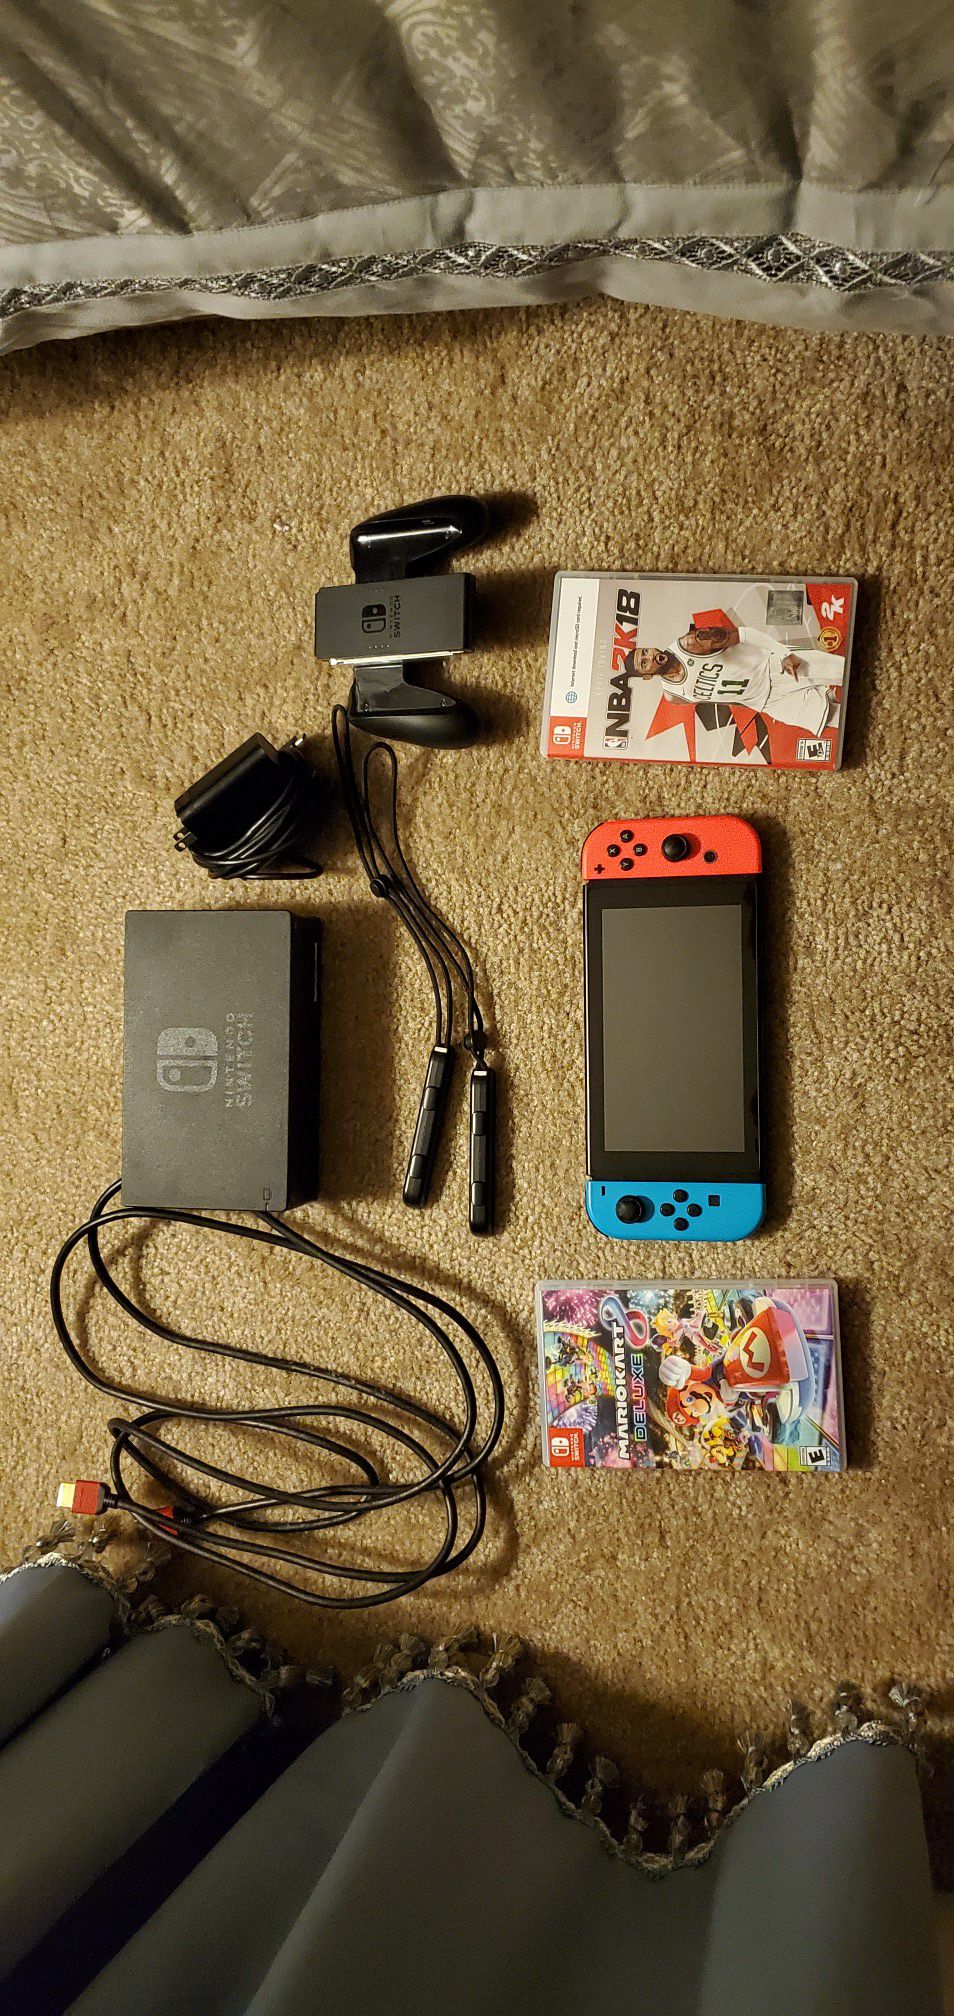 Nintendo Switch with Mario Kart and NBA 2k18 (has some issues)